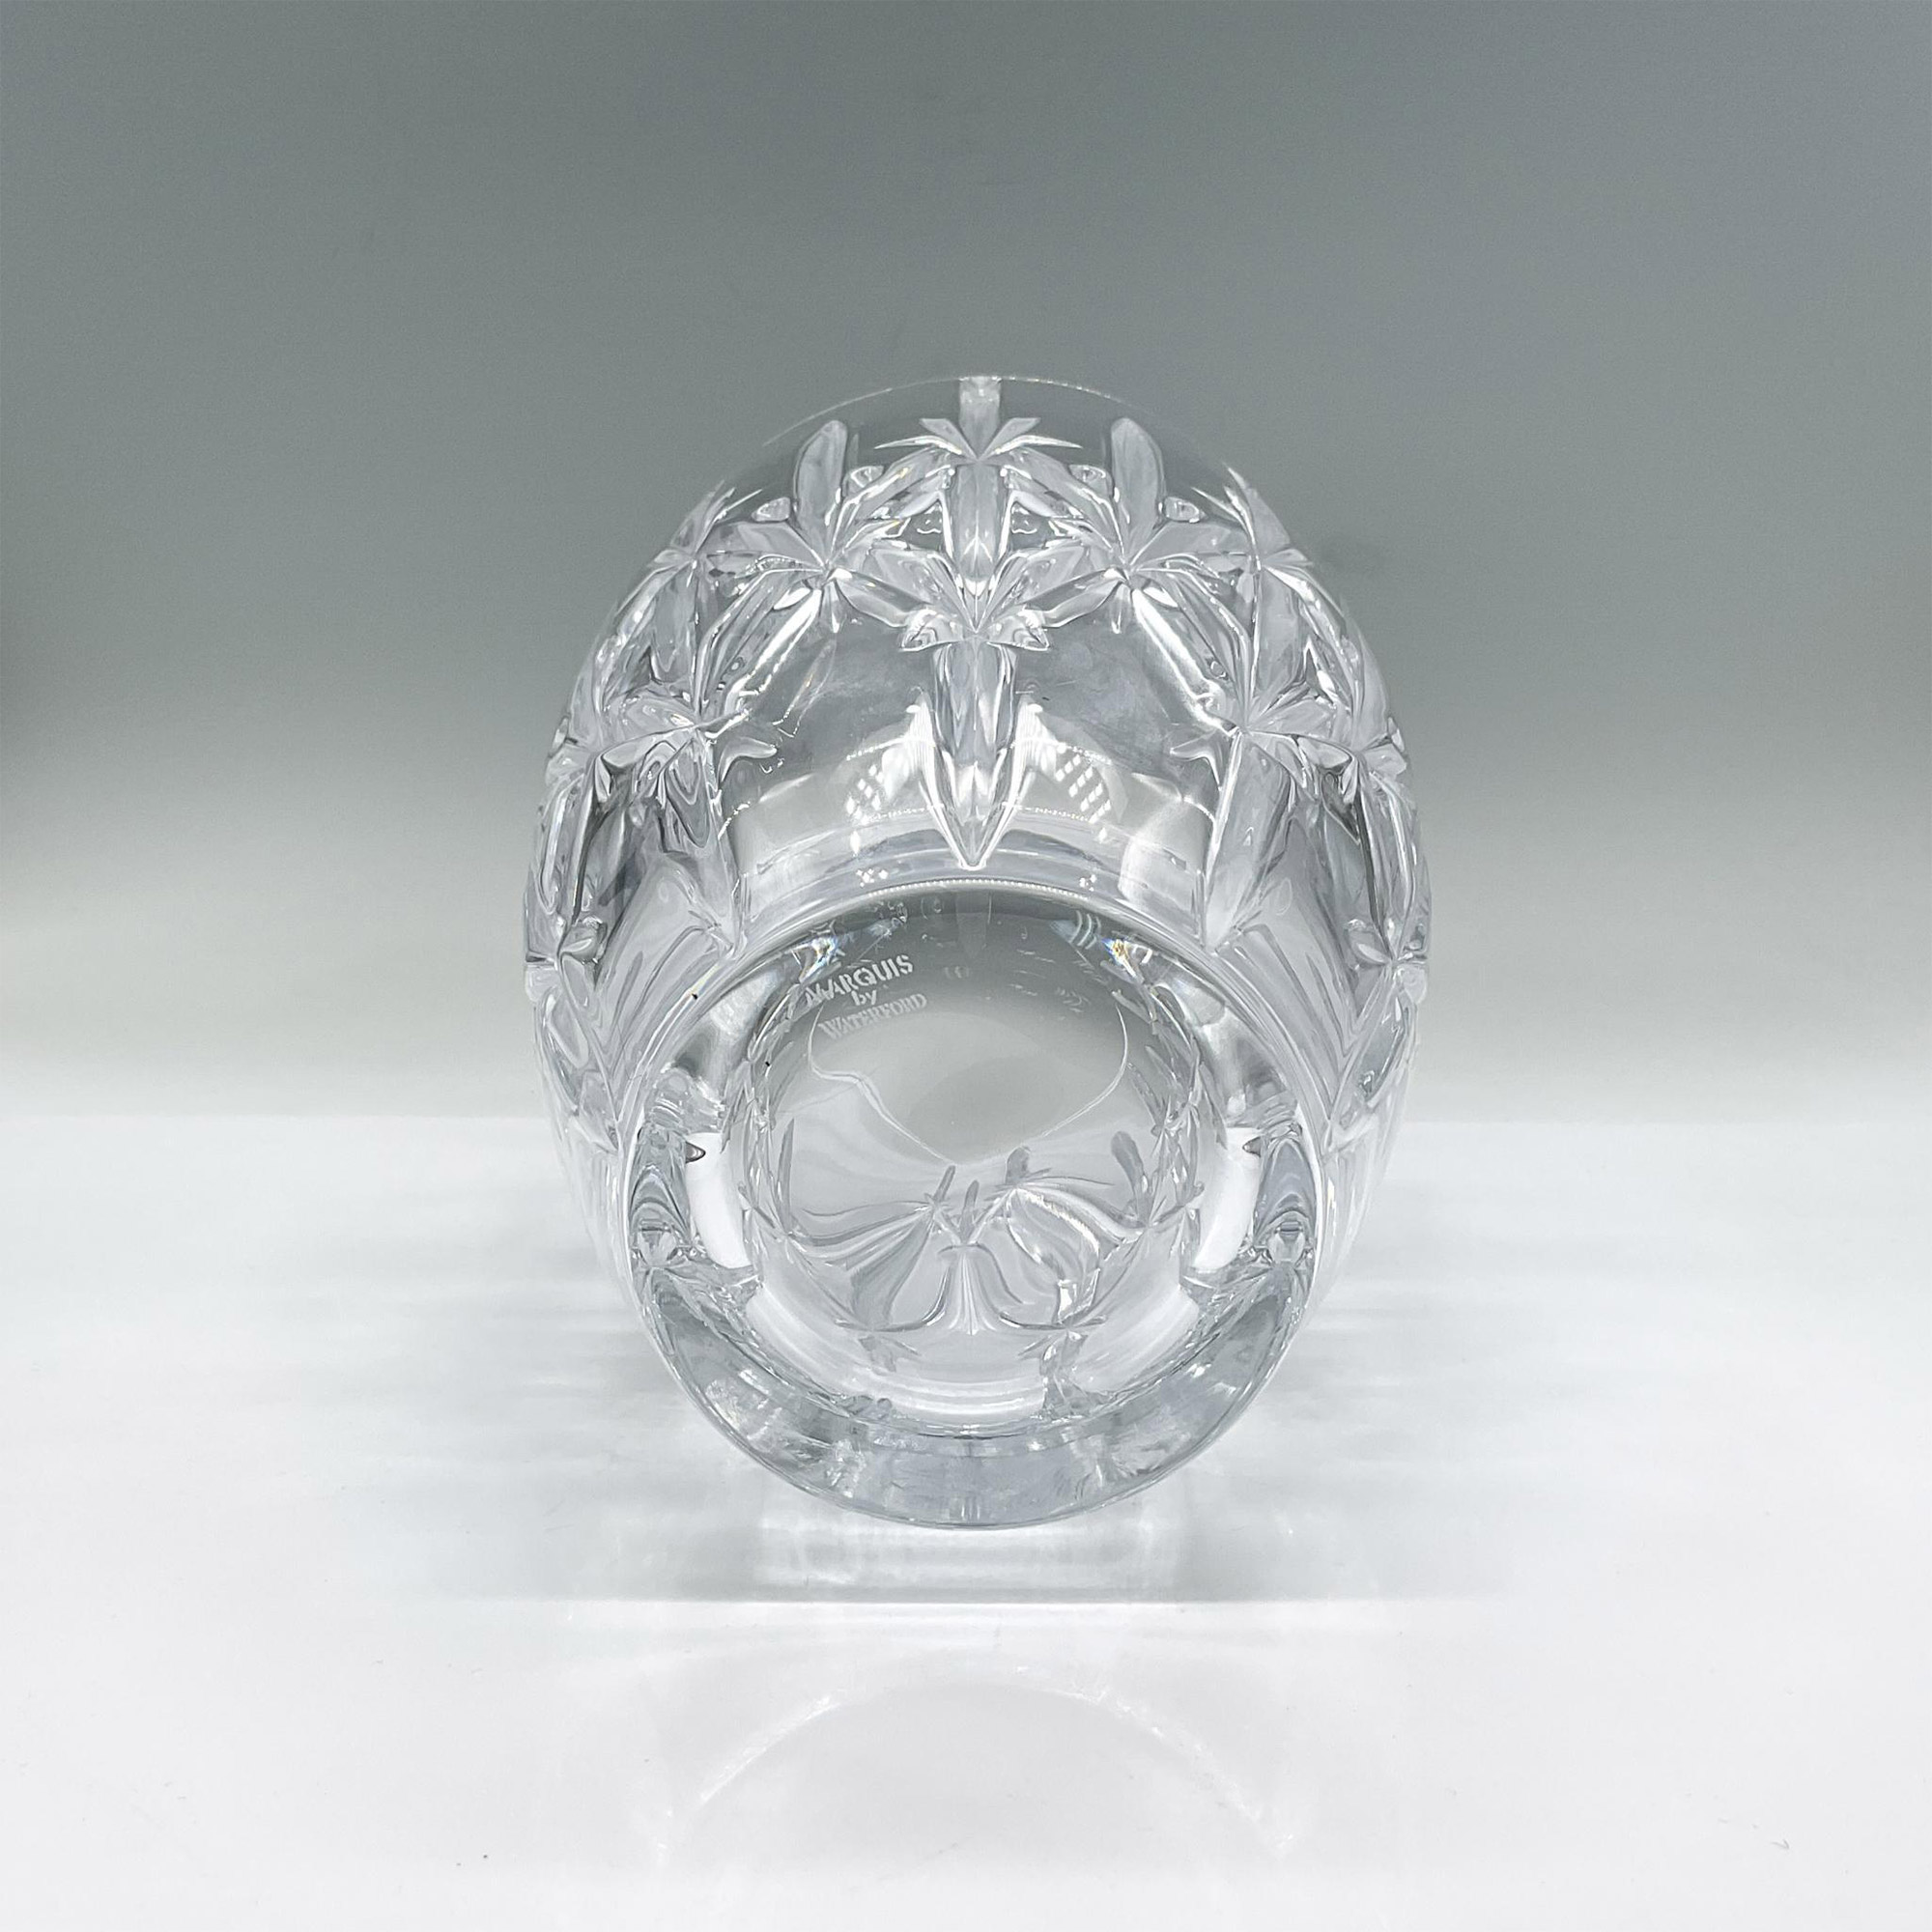 Waterford Marquis Crystal Vase, Sparkle Pattern - Image 3 of 3